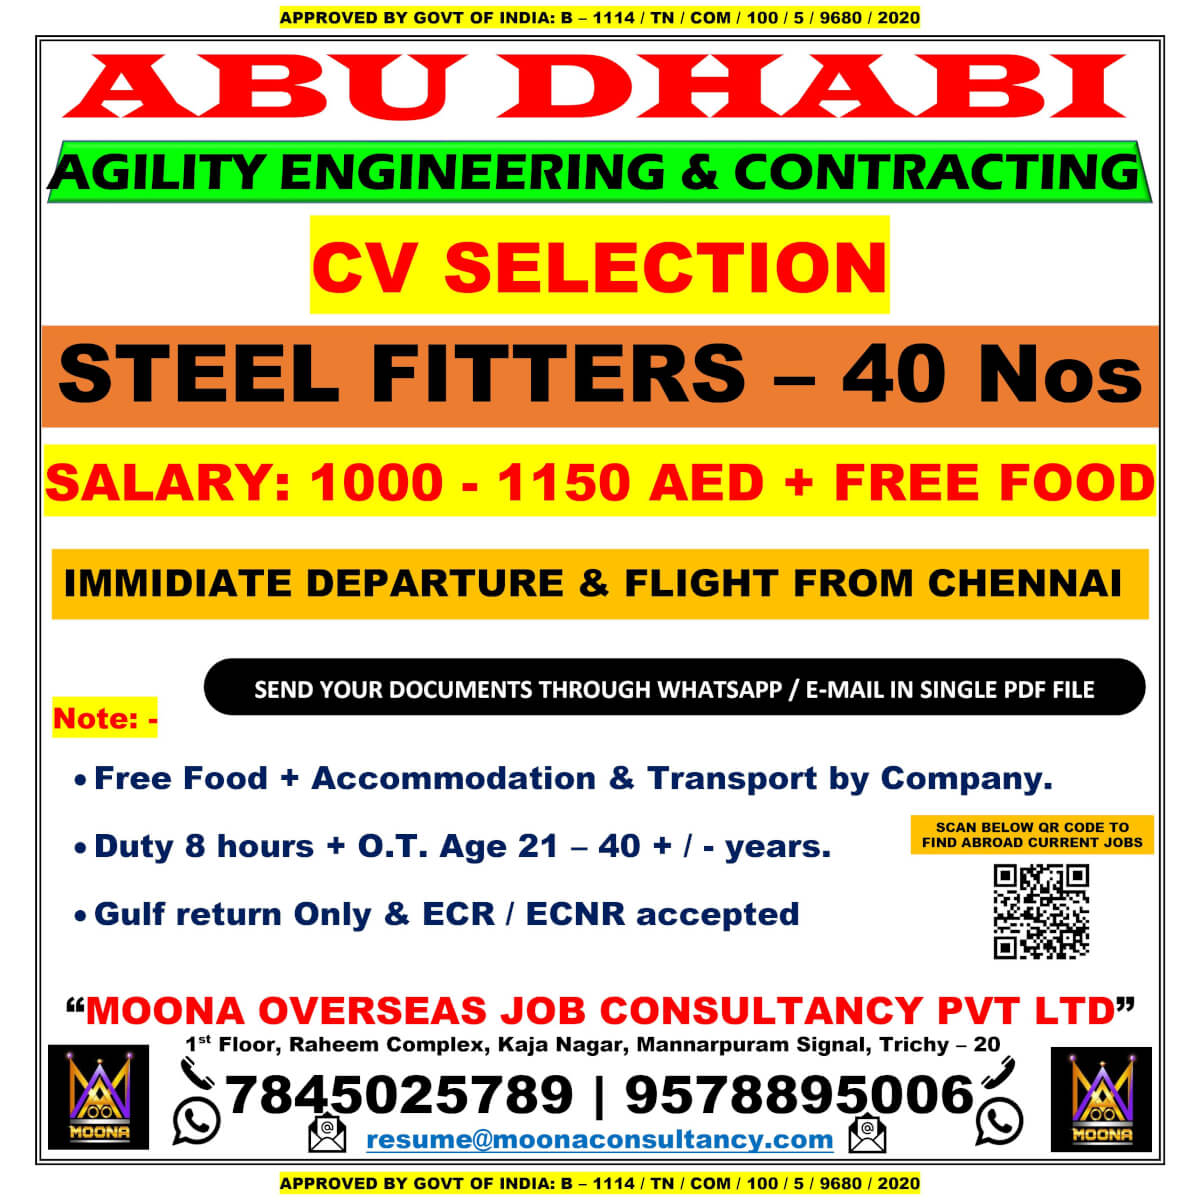 STEEL FITTERS VACANCY FOR ABU DHABI